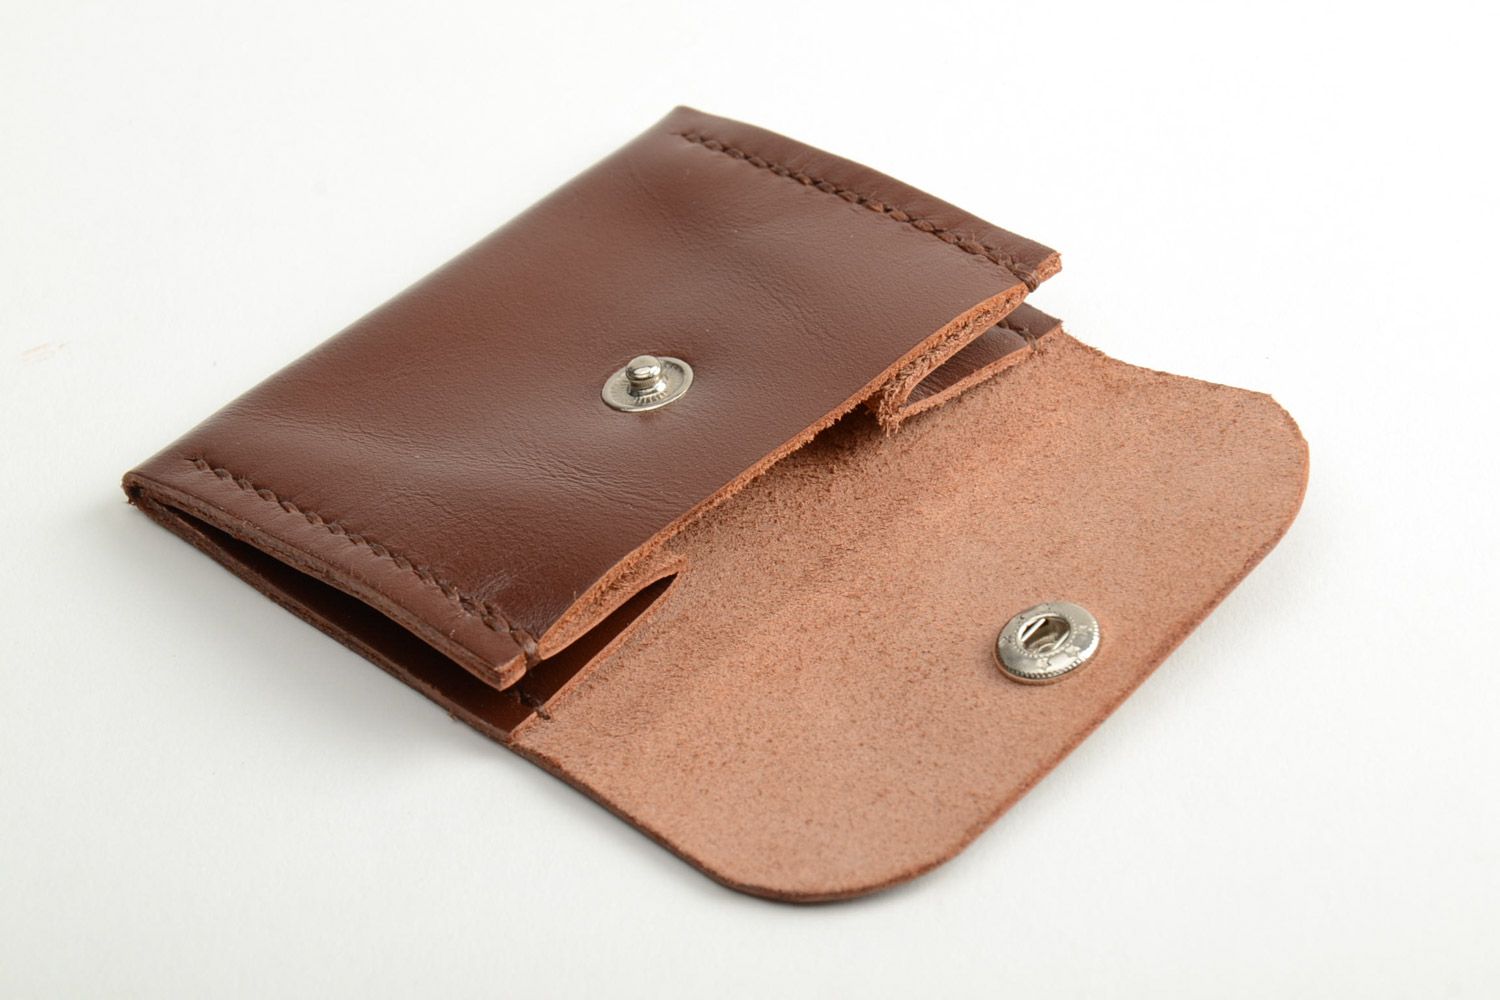 Handmade men's coin purse sewn of genuine leather of brown color with metal stud photo 4